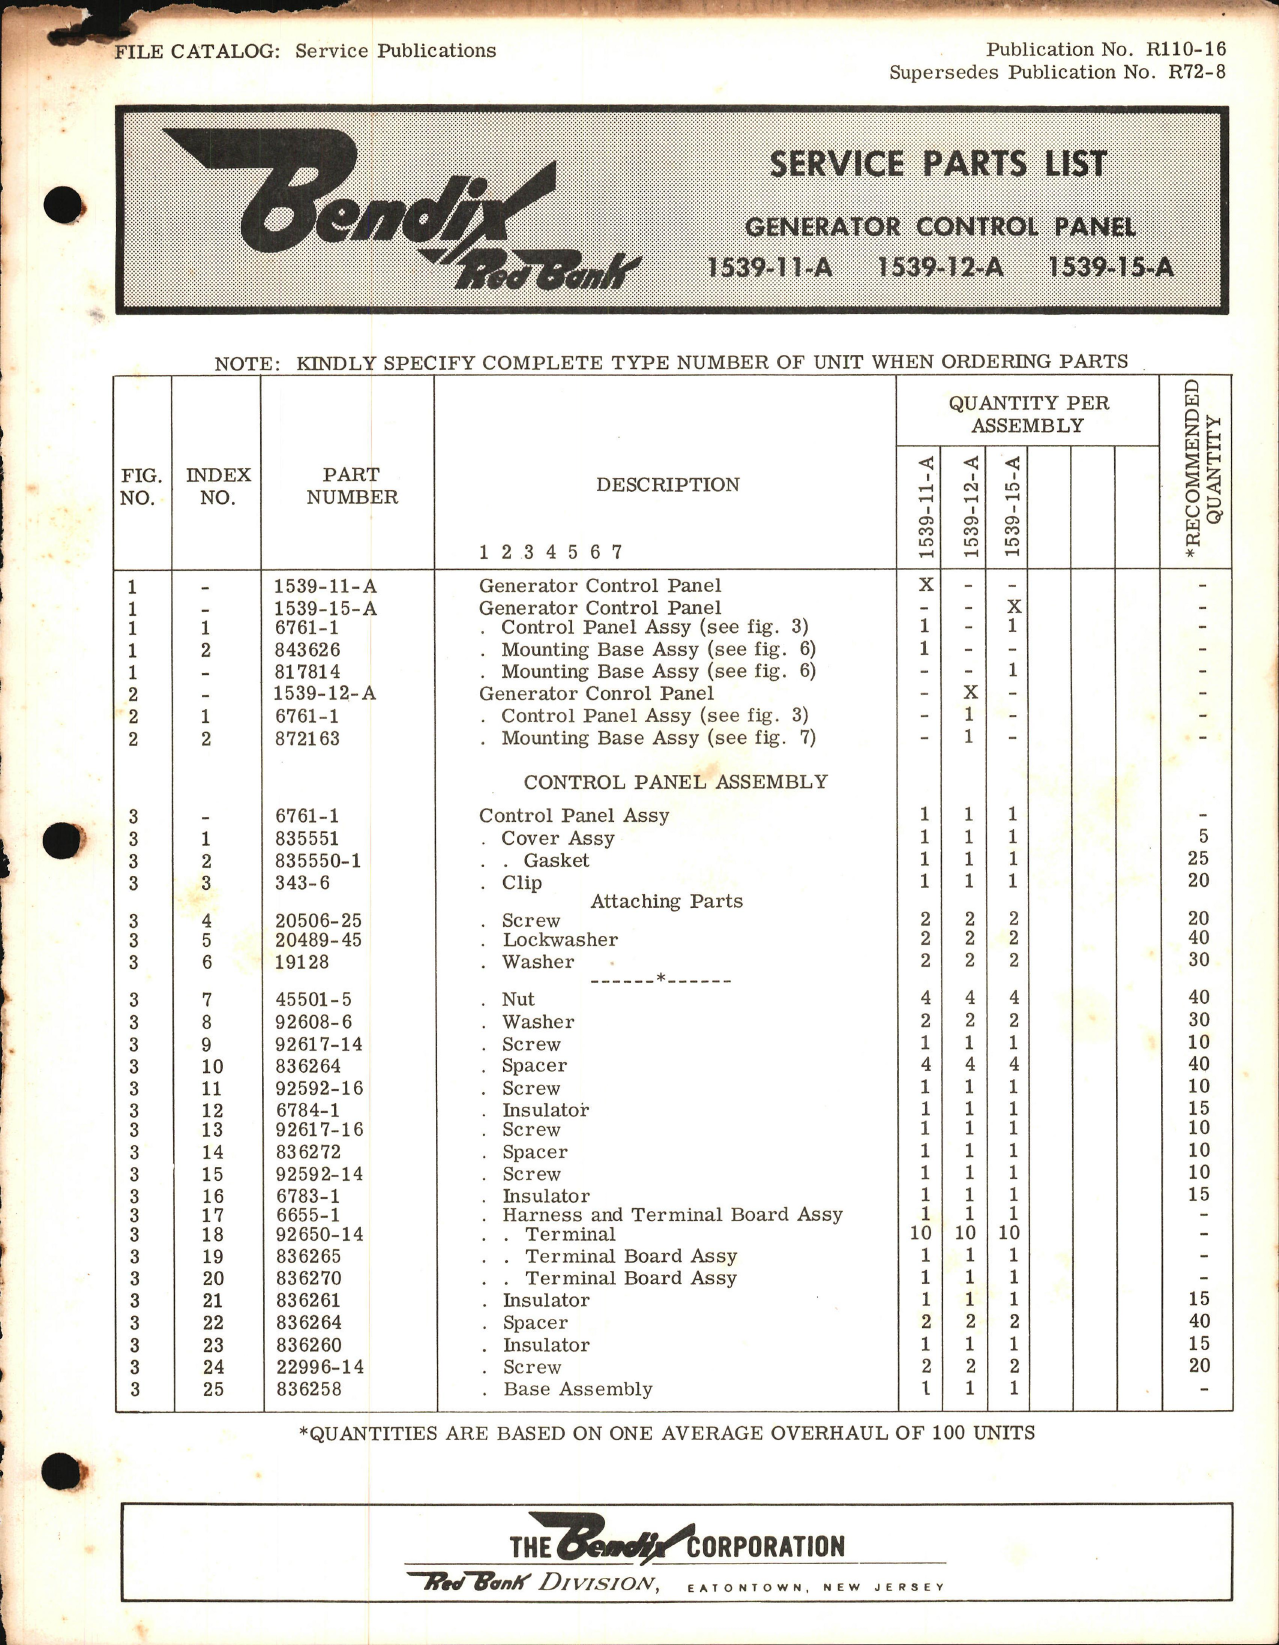 Sample page 1 from AirCorps Library document: Service Parts List for Generator Control Panel 1539-11, -12, and -15